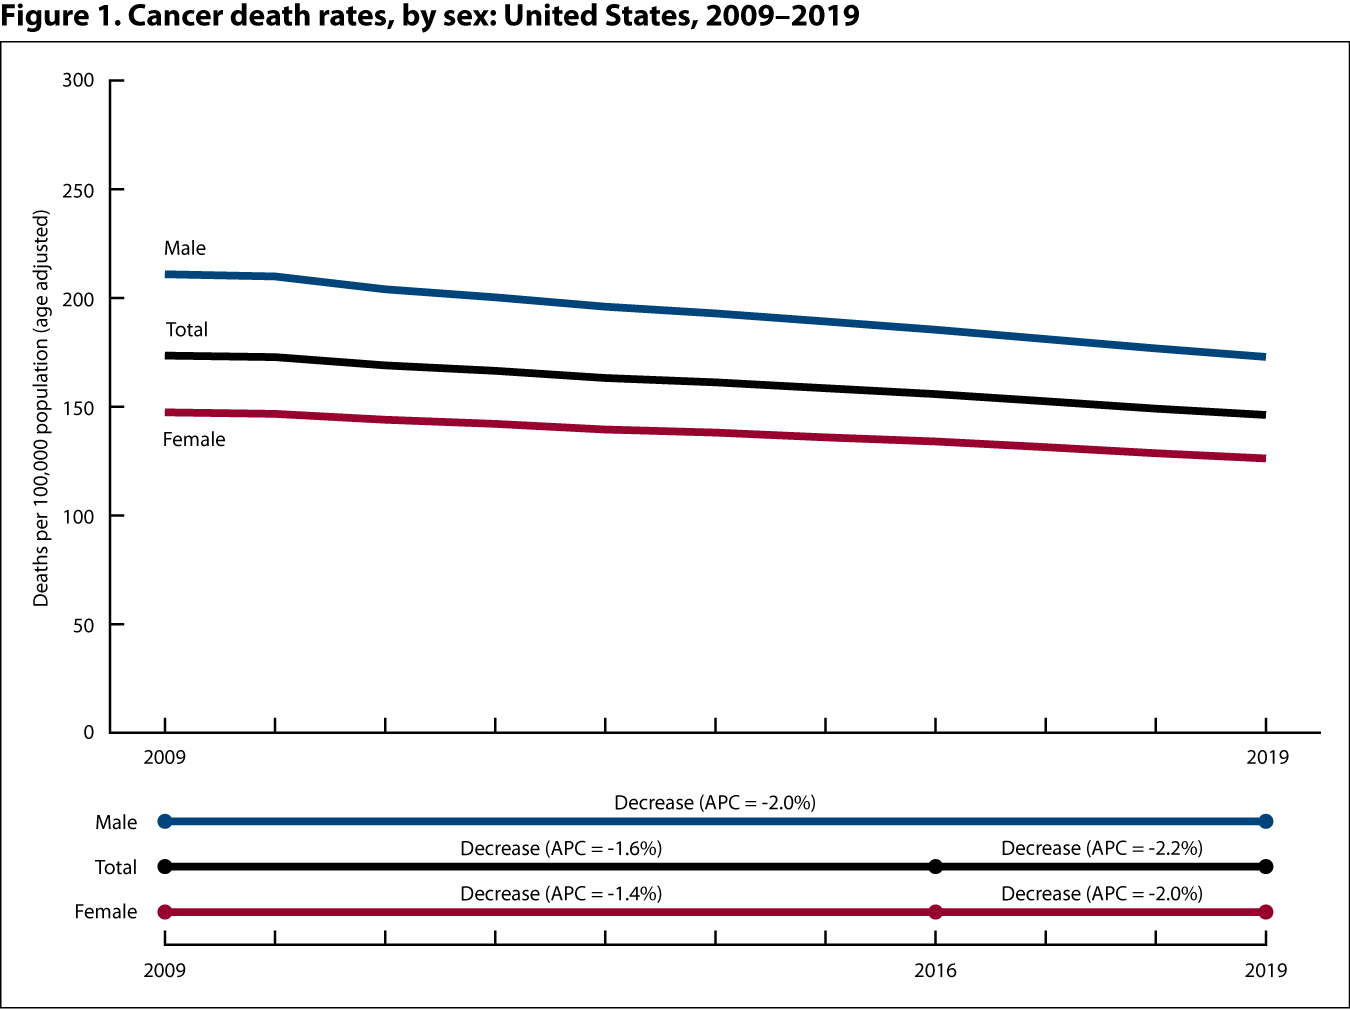 Figure 1 is a line graph showing cancer death rates (deaths per 100,000 population) by sex for 2009 through 2019.